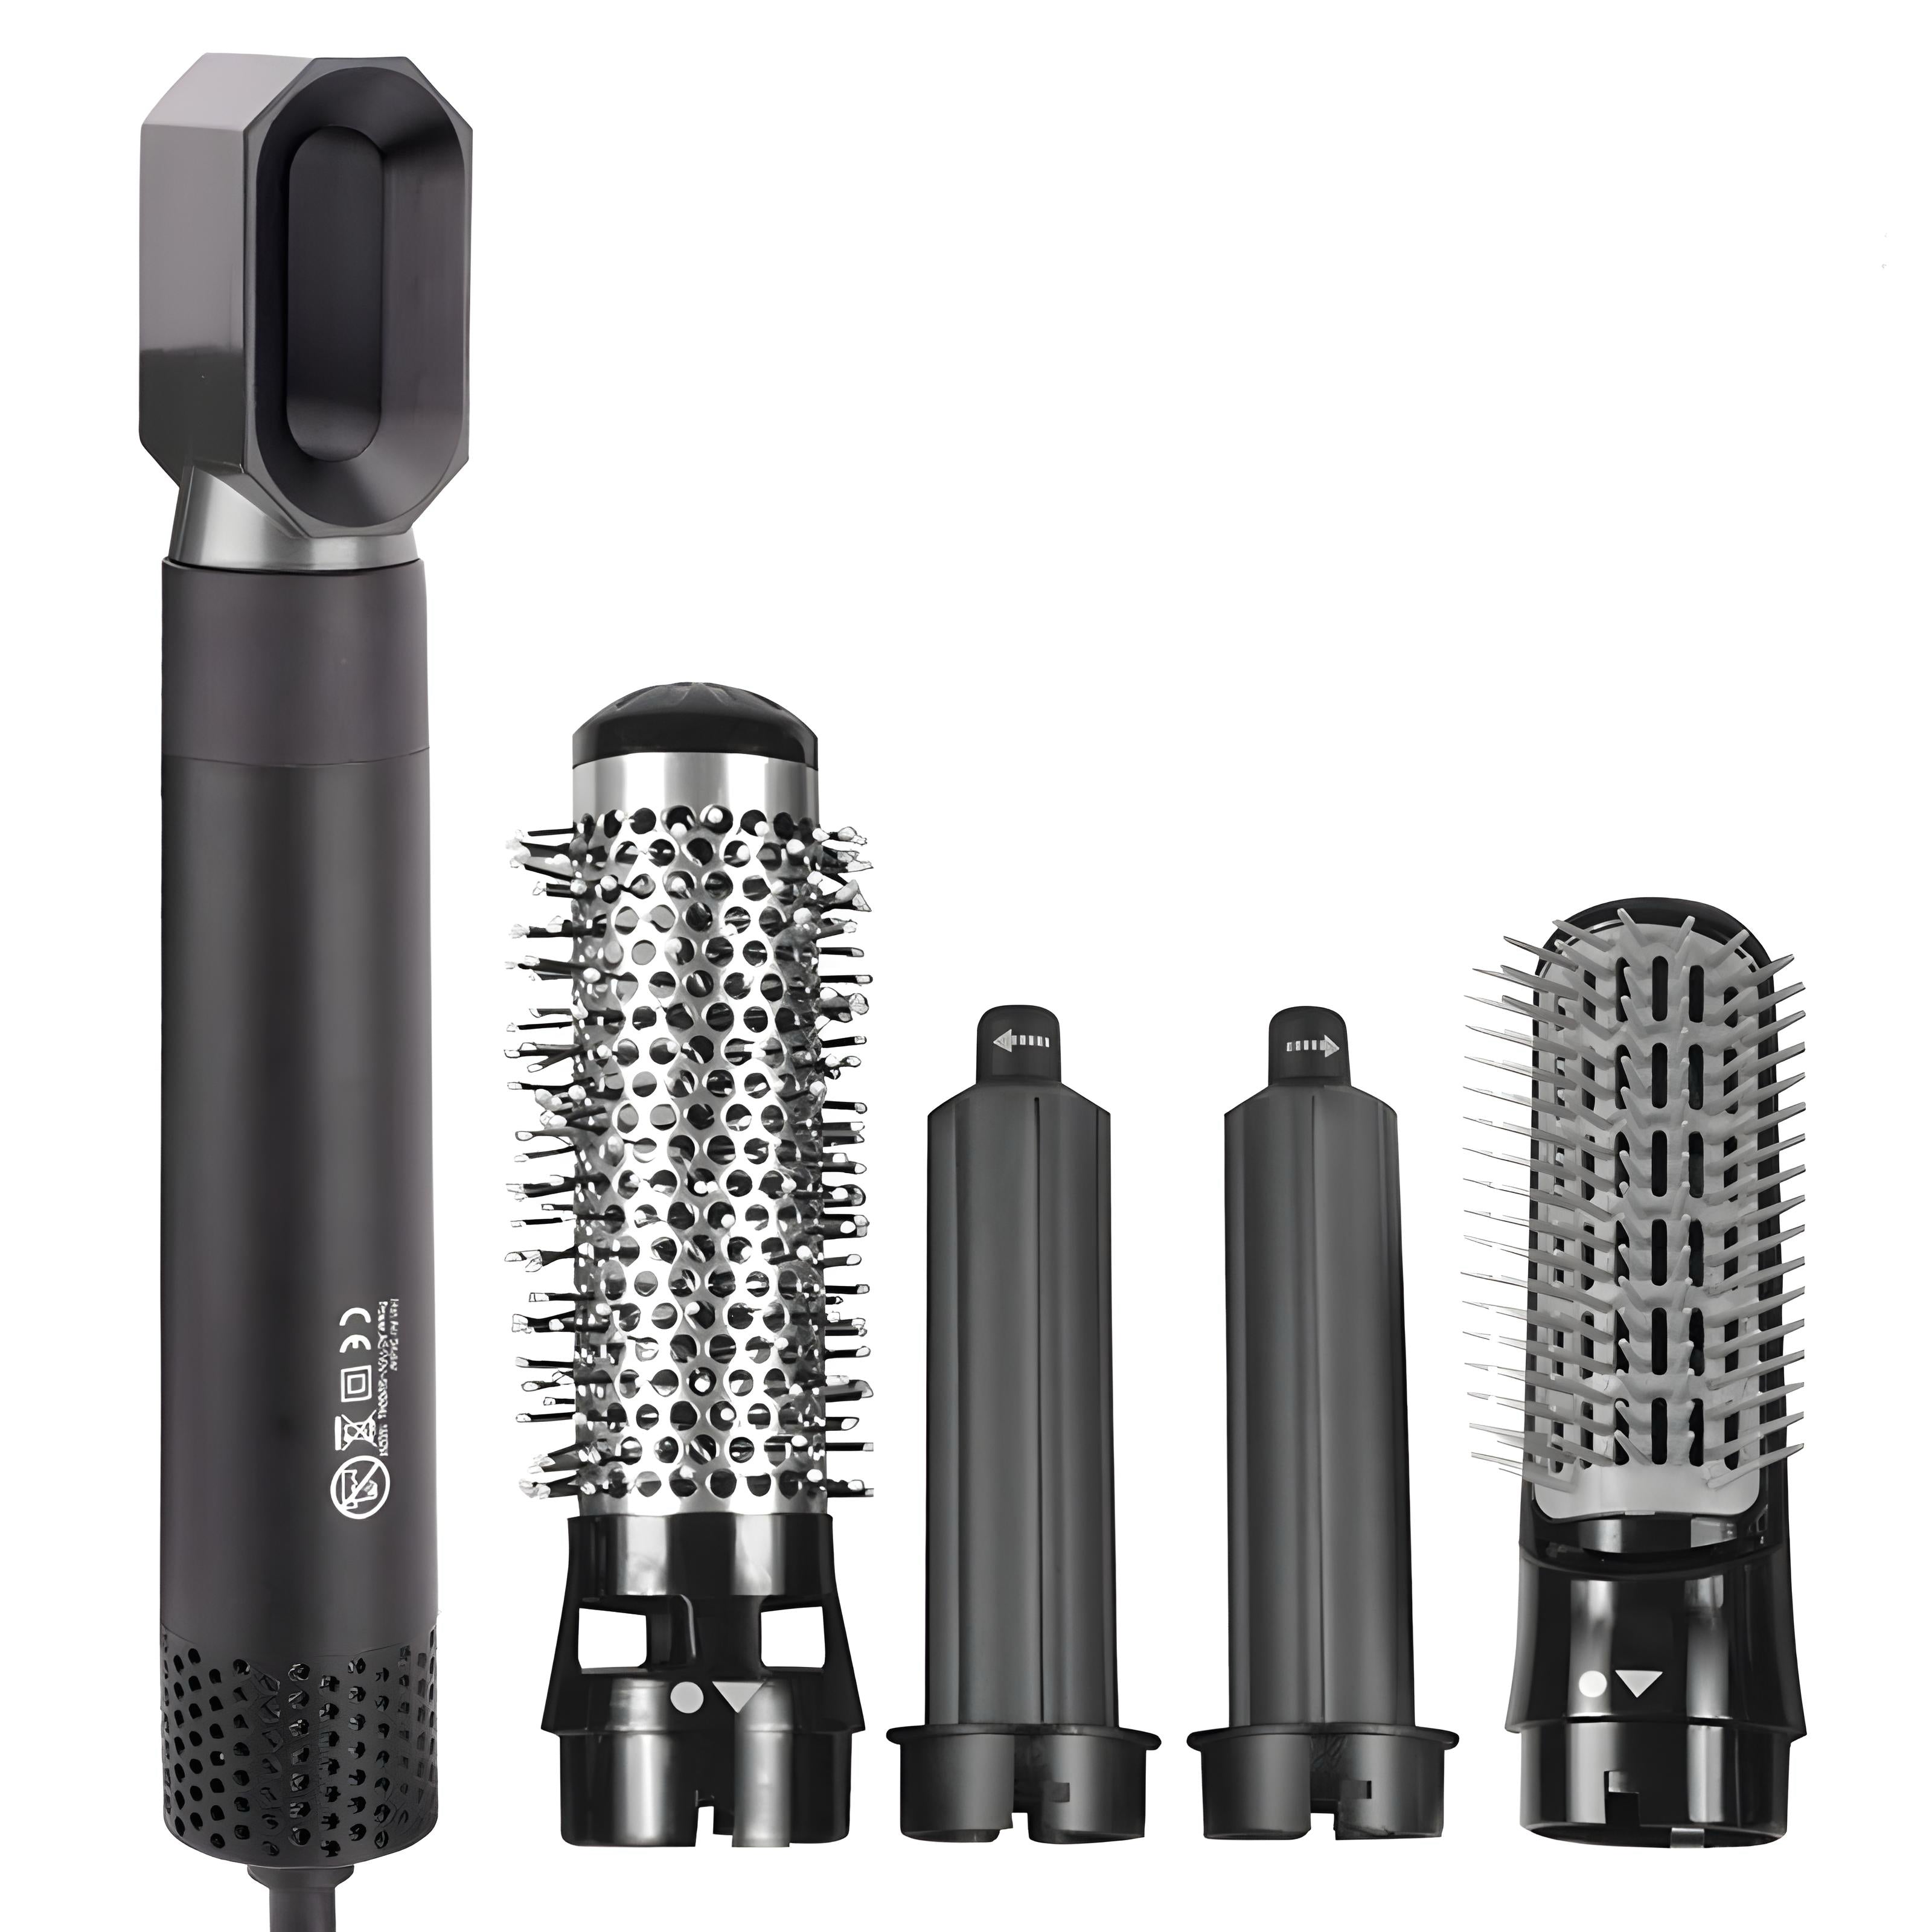 Ionic Hair Dryer 5 in 1